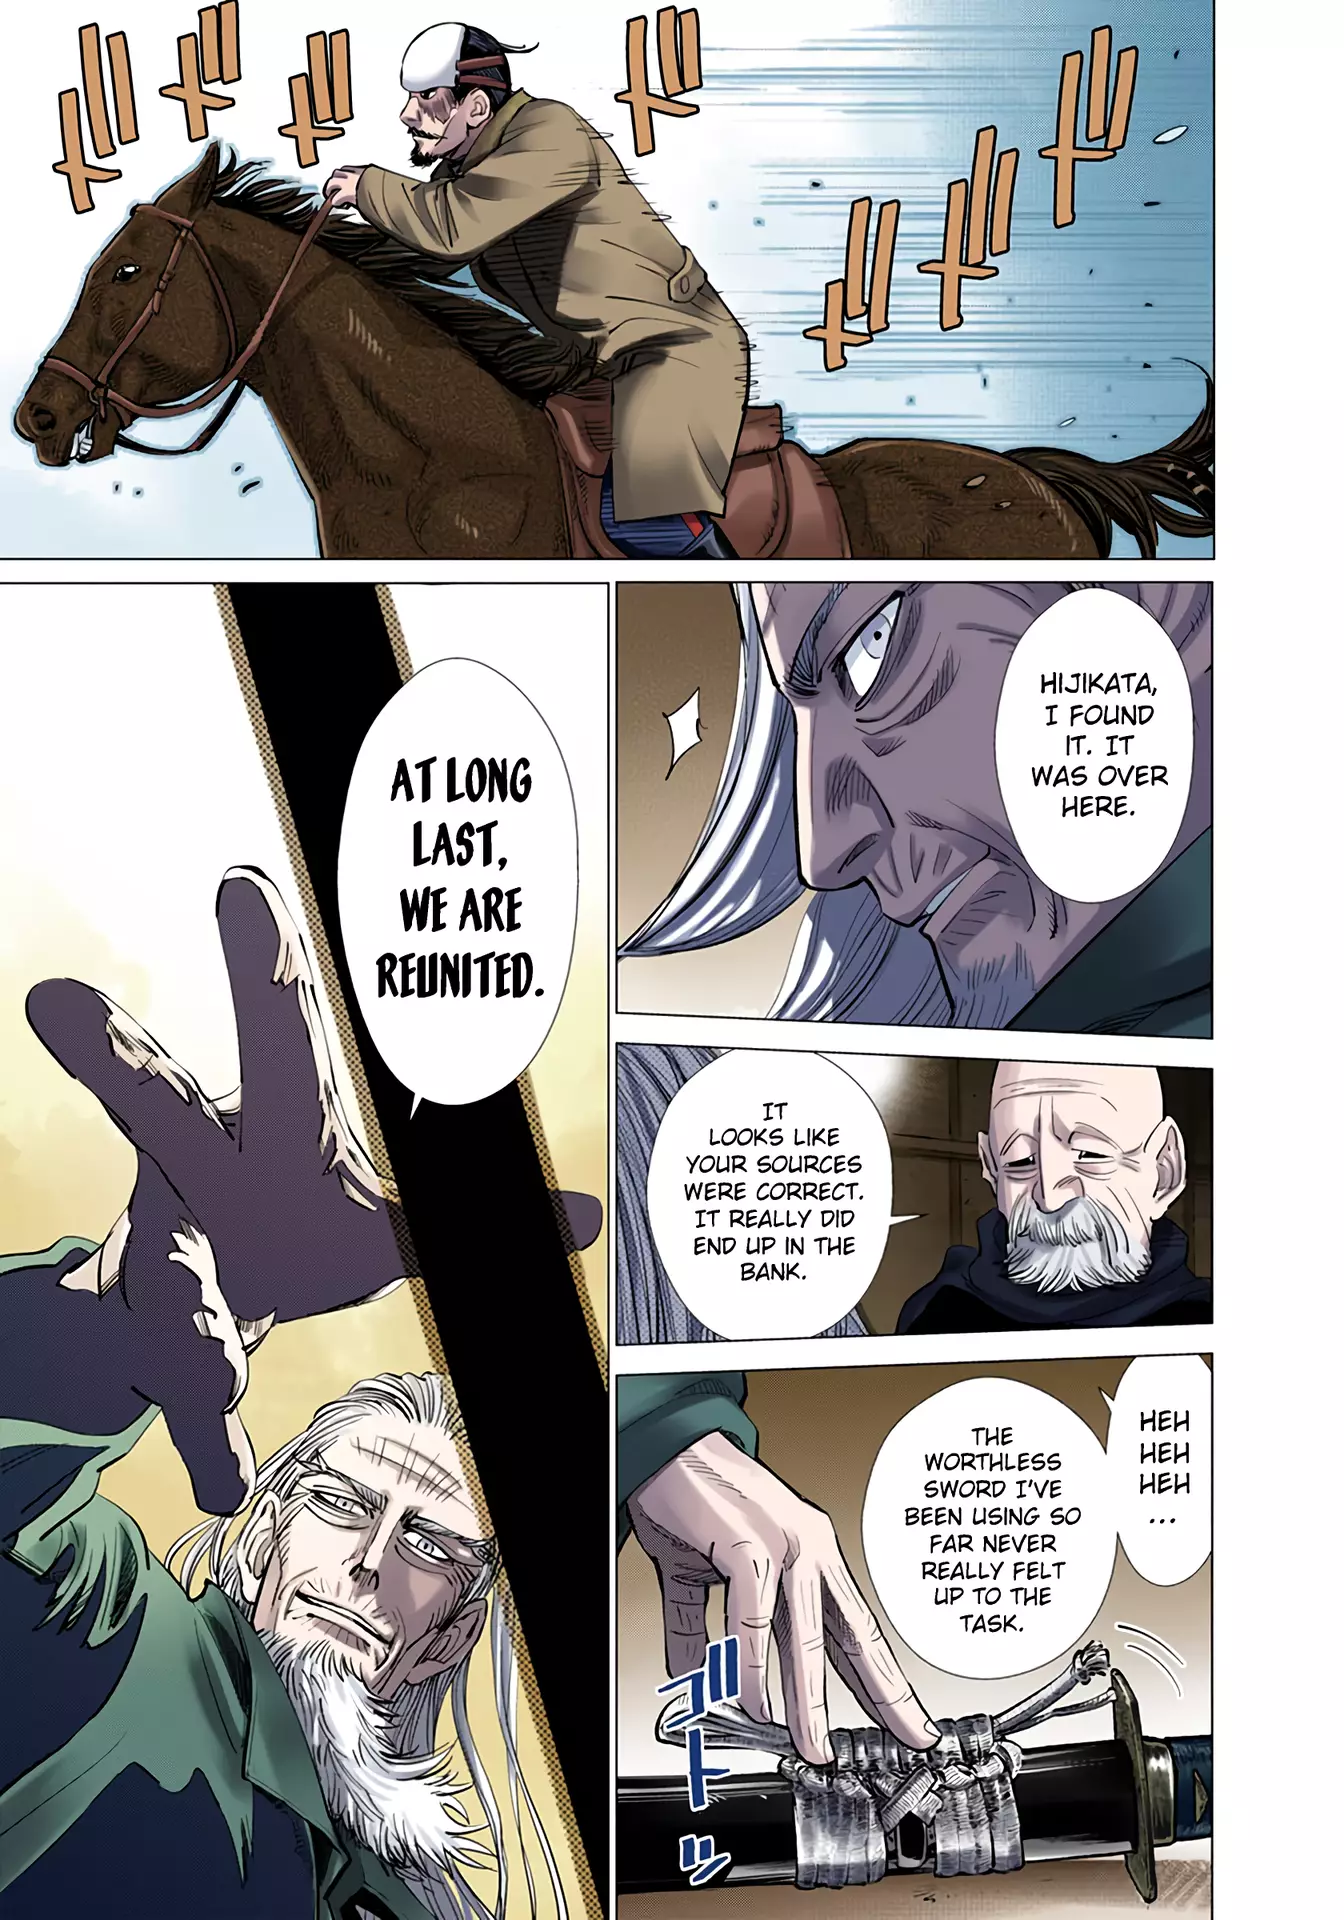 Golden Kamuy - Digital Colored Comics - 34 page 10-81f26df4